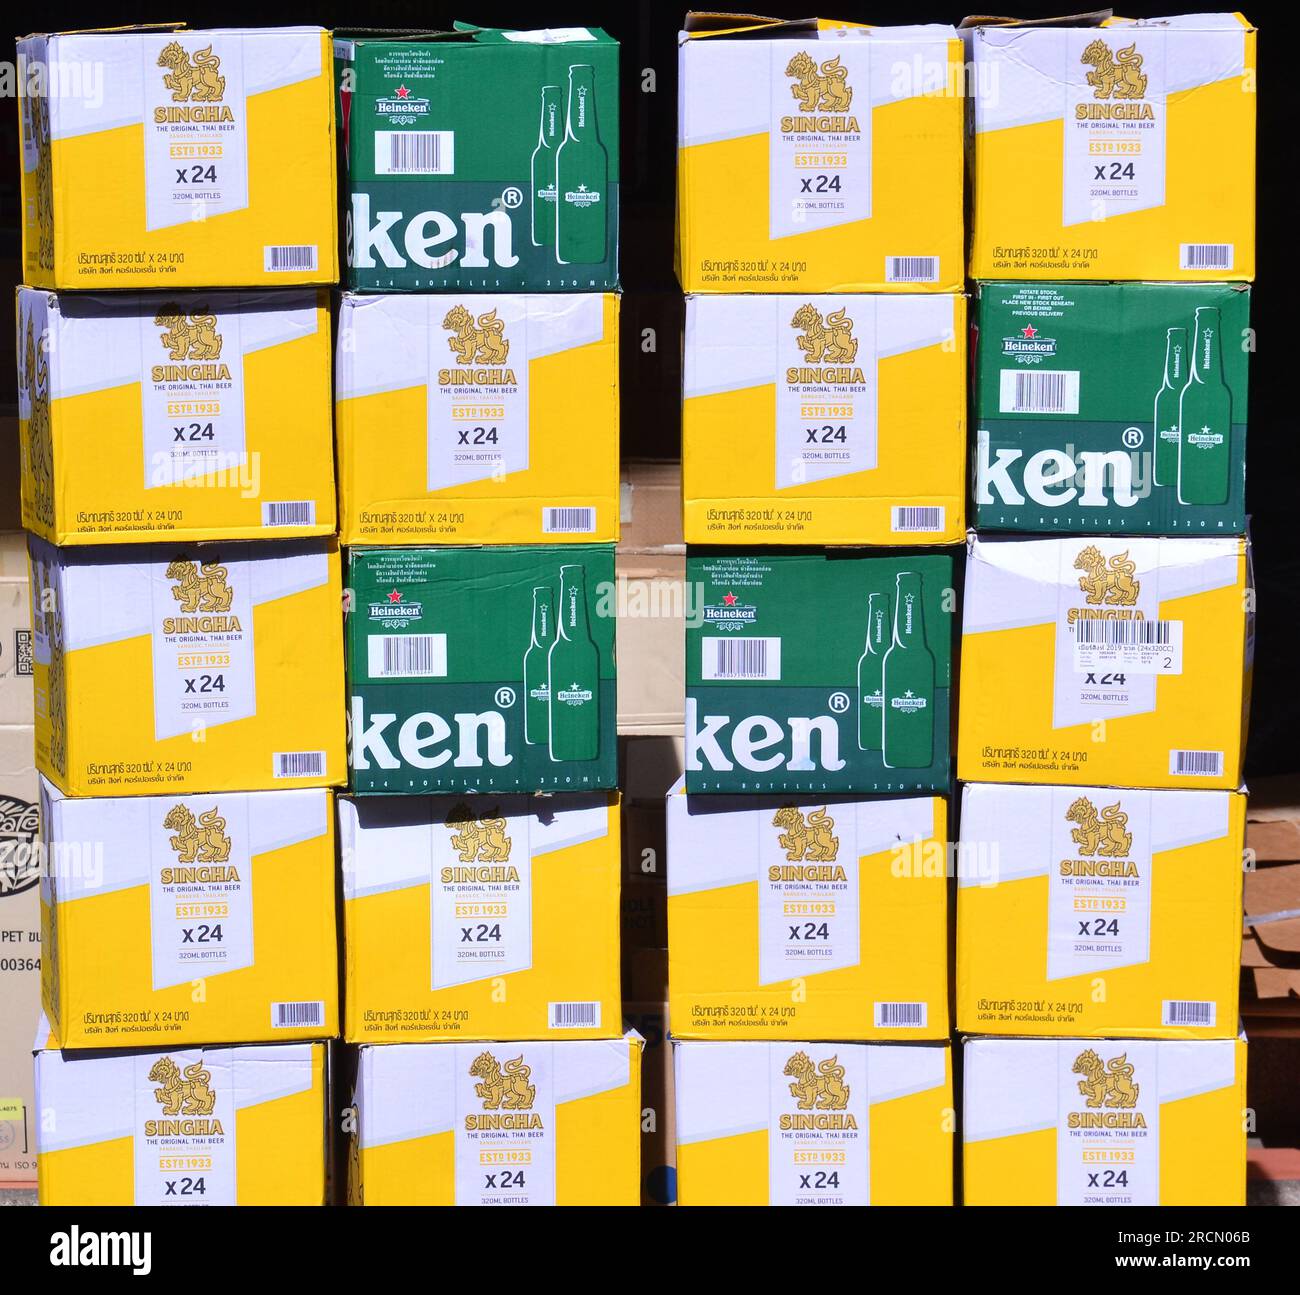 empty cardboard cases which use to hold glass bottles of singha beer and heineken beer, wait to be collected in a tourist area, patpong soi 2 , bangkok, thailand, for reuse or recycling Stock Photo